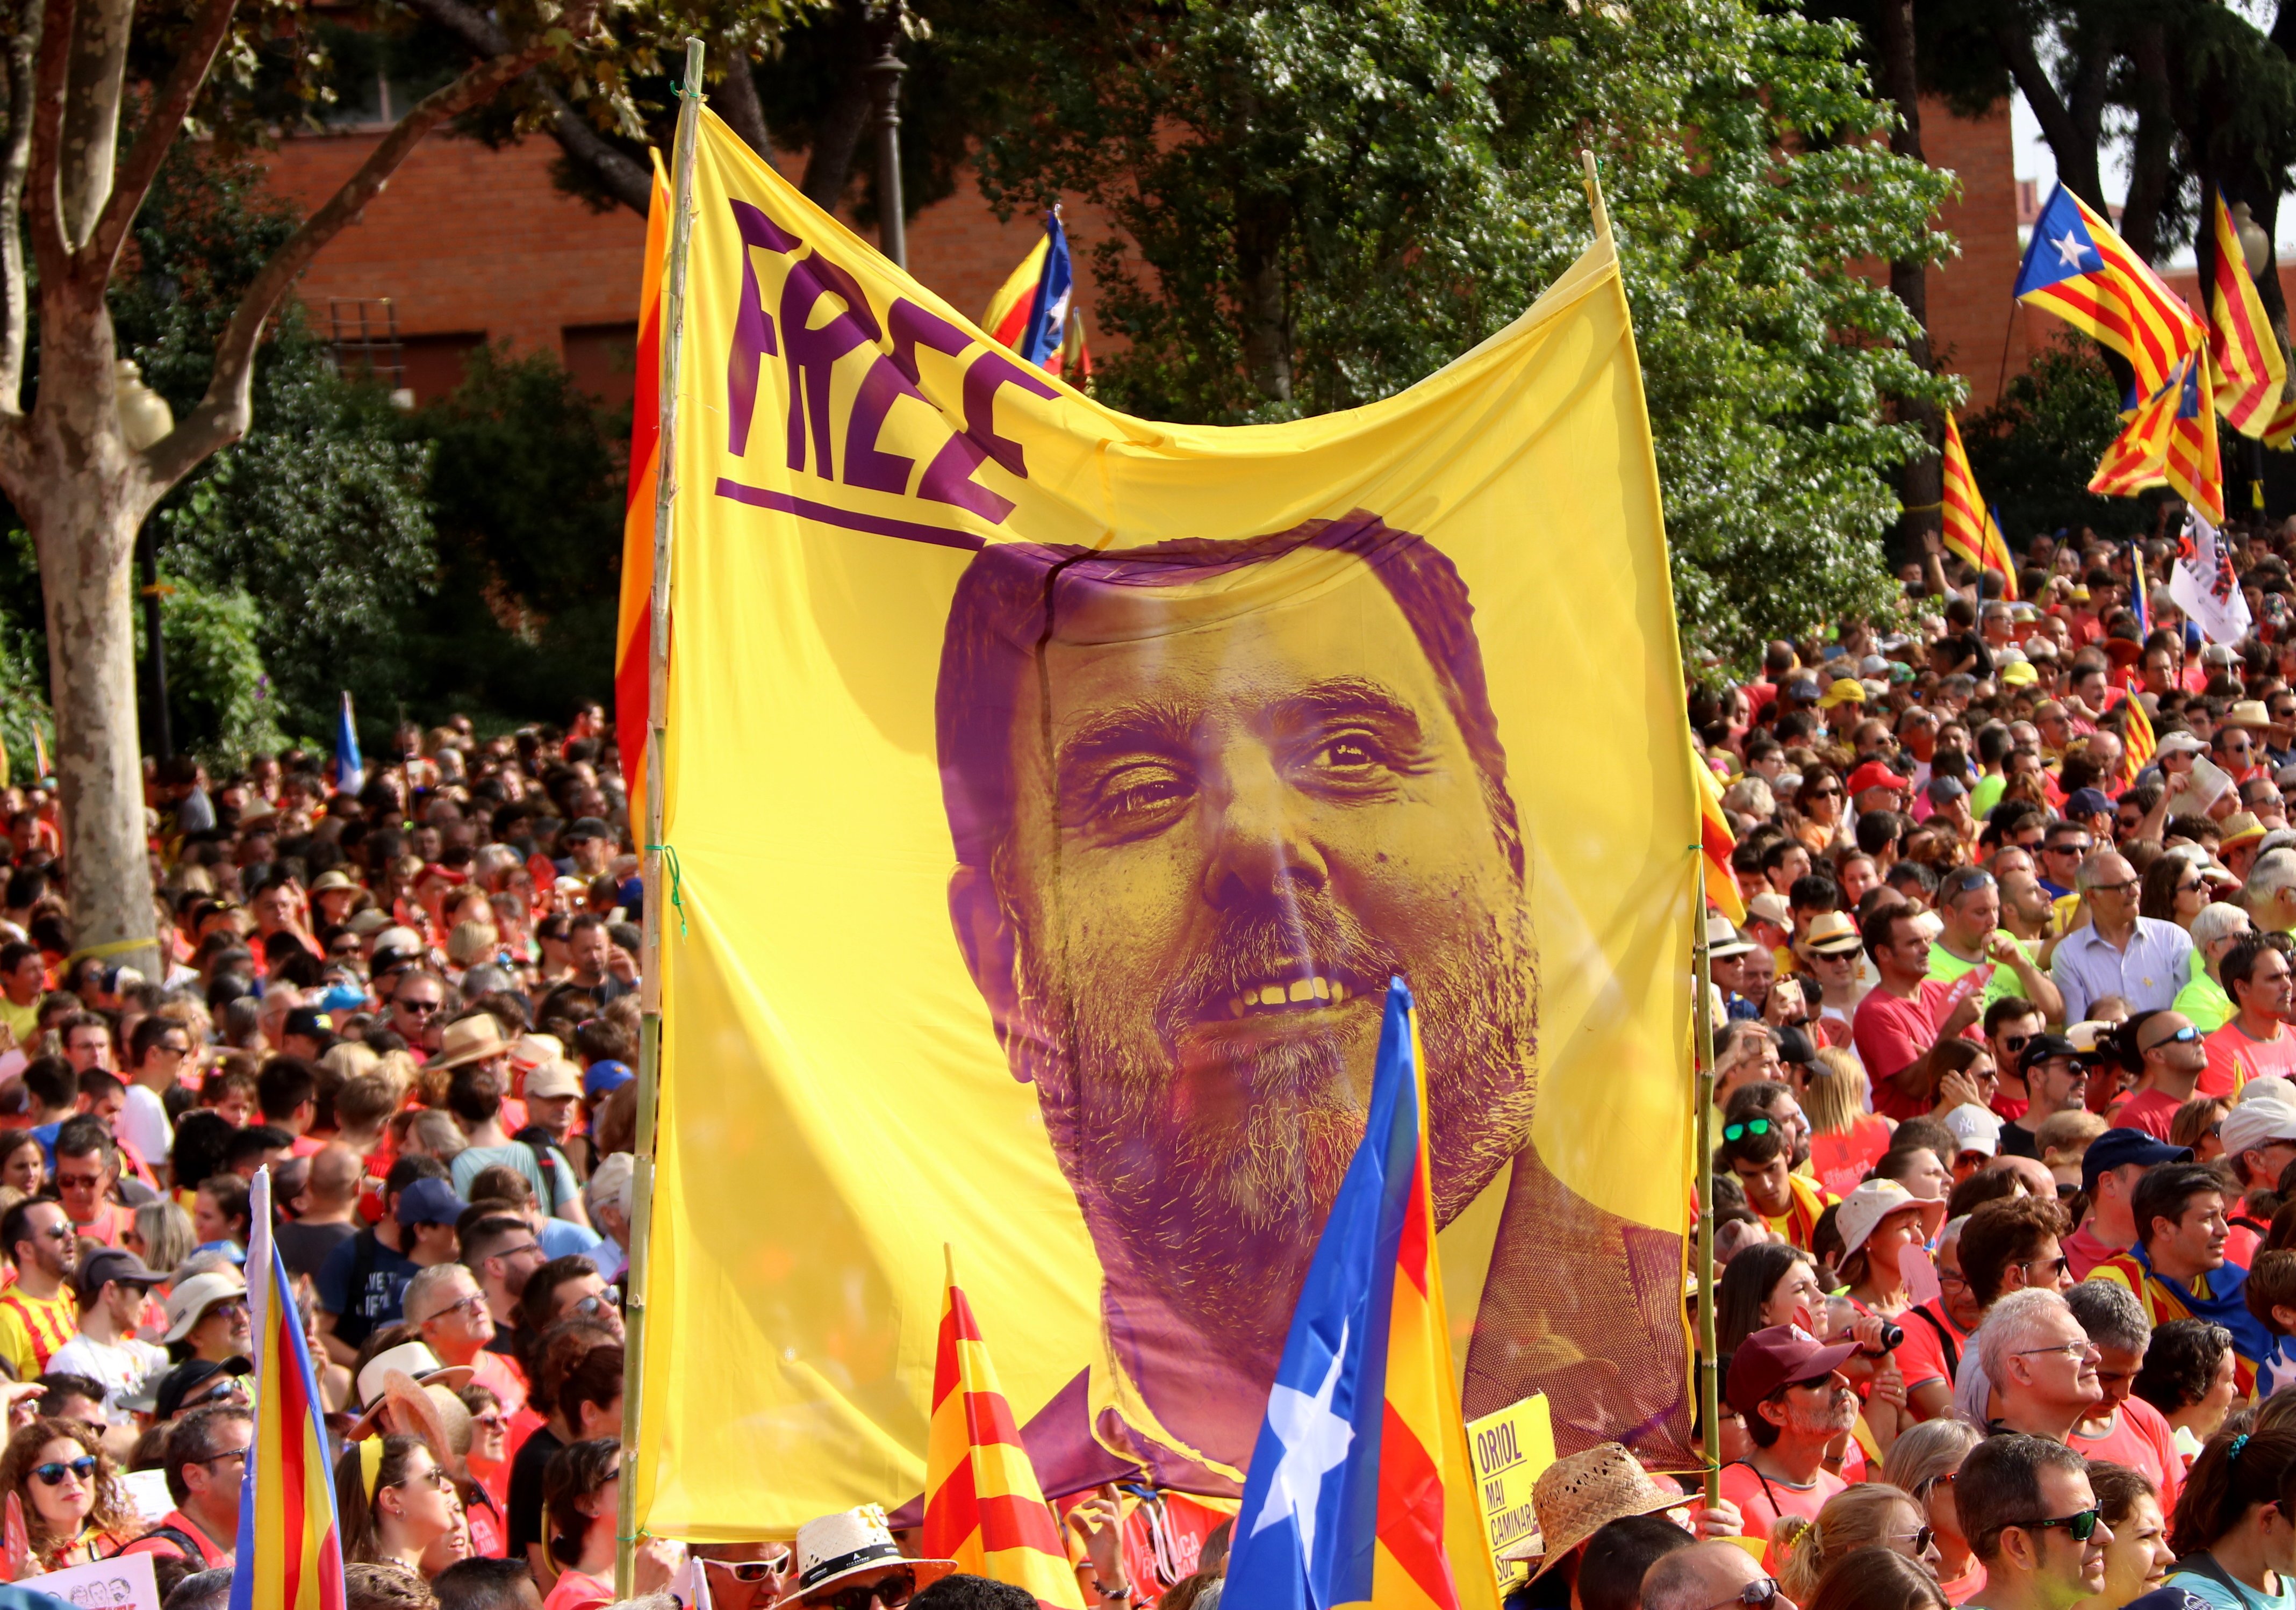 Imprisoned Catalan VP Junqueras: "I'm not giving up on a free Catalonia"